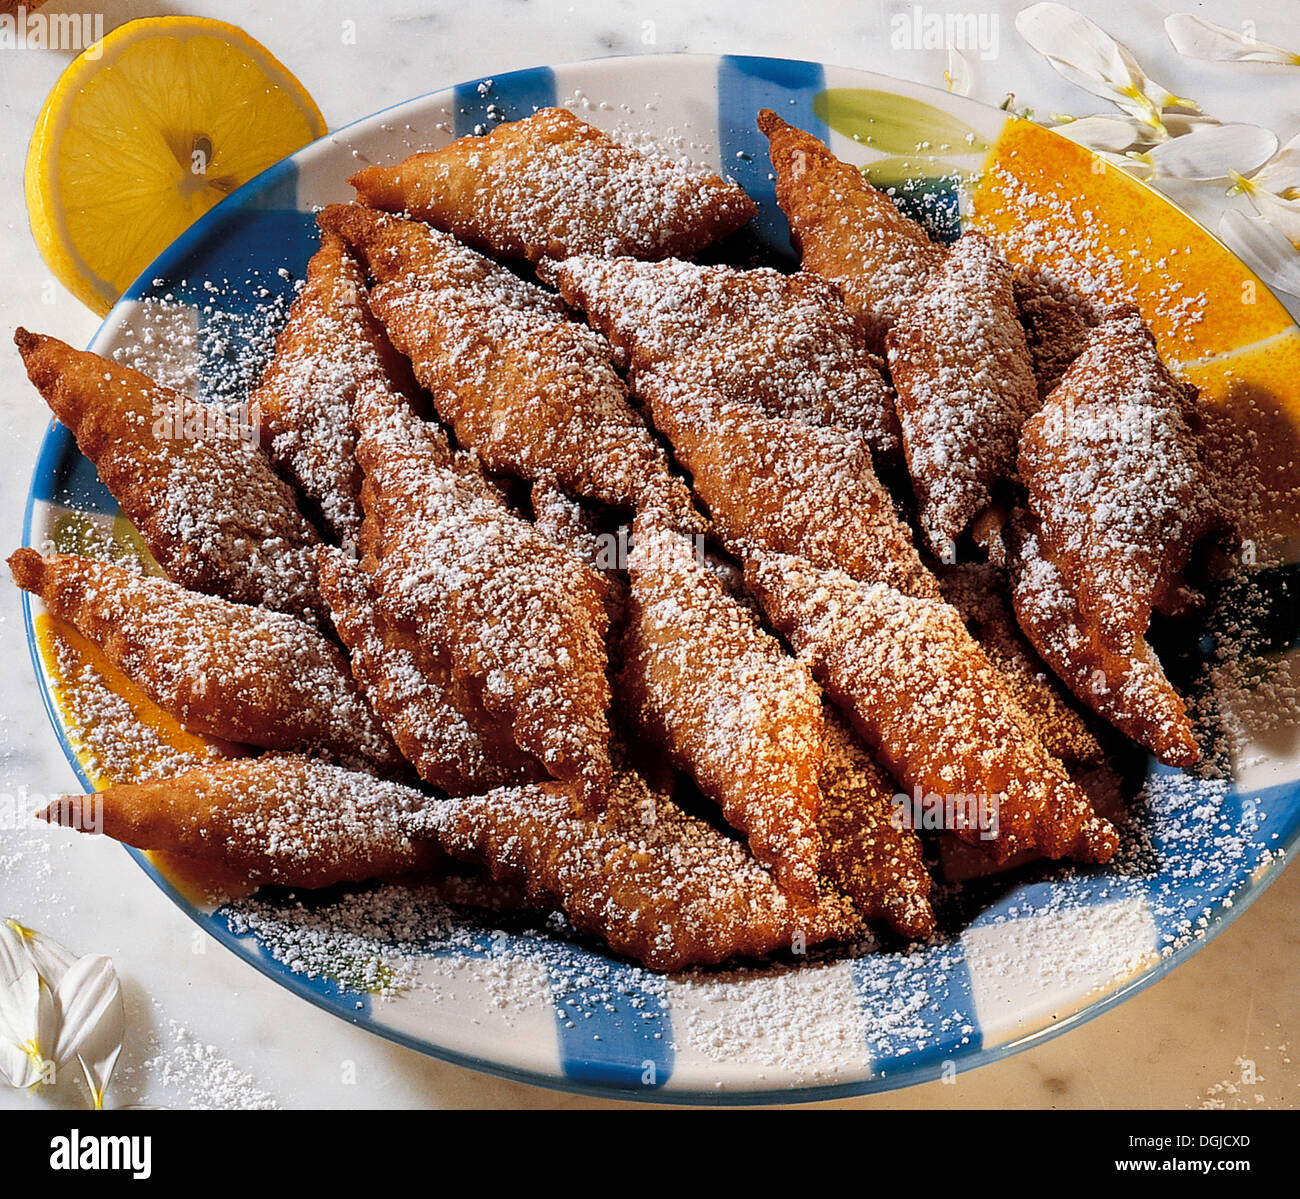 Kilwikuechle, deep-fryed dough specialty from Baden, Germany. Stock Photo